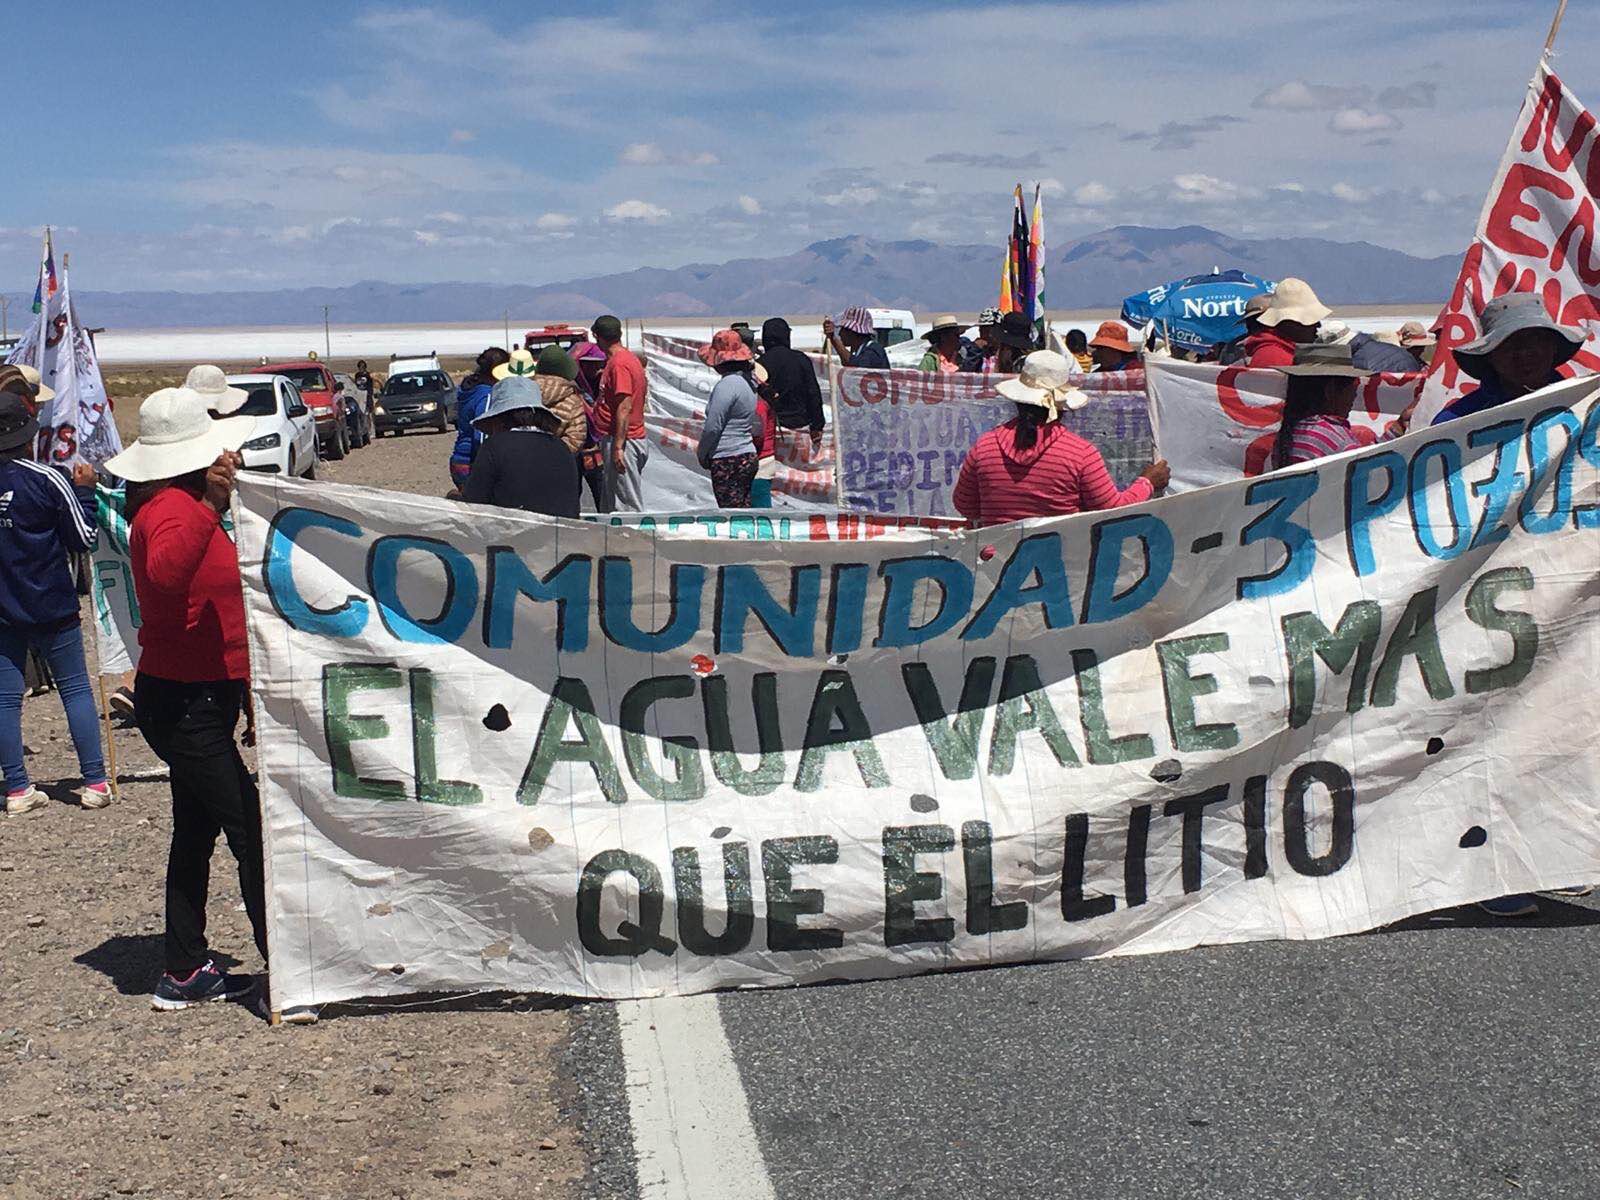 Communities protesting lithium mining in Jujuy, Argentina, saying water is more valuable than lithium